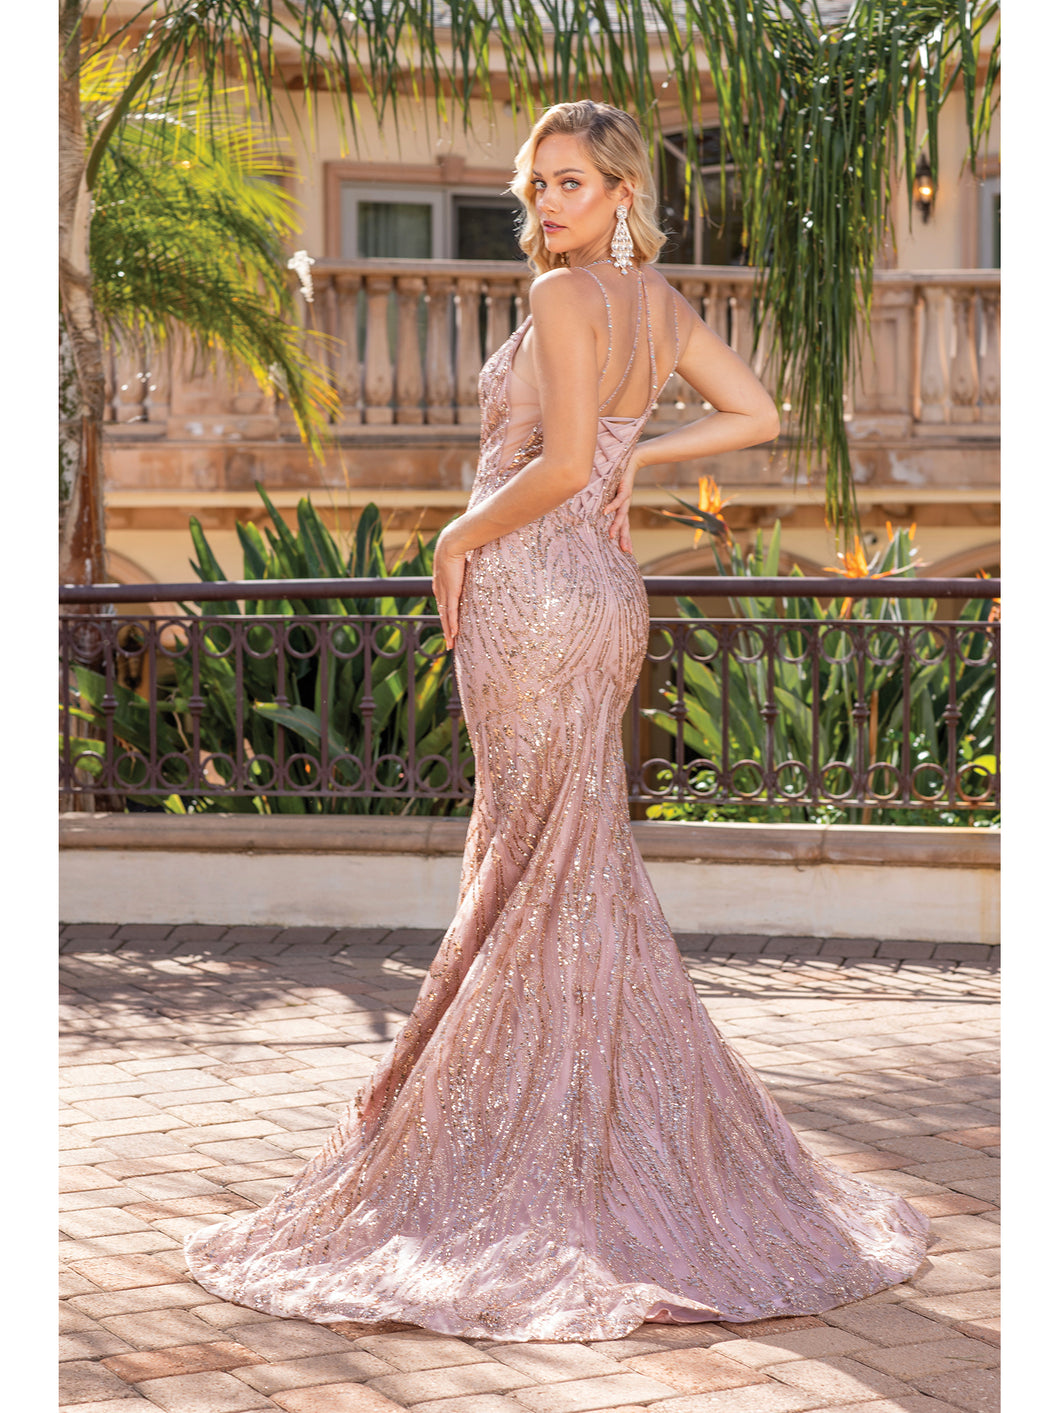 DQ 4337 - Glitter Pattern Fit & Flare Prom Gown with Corset Back ...